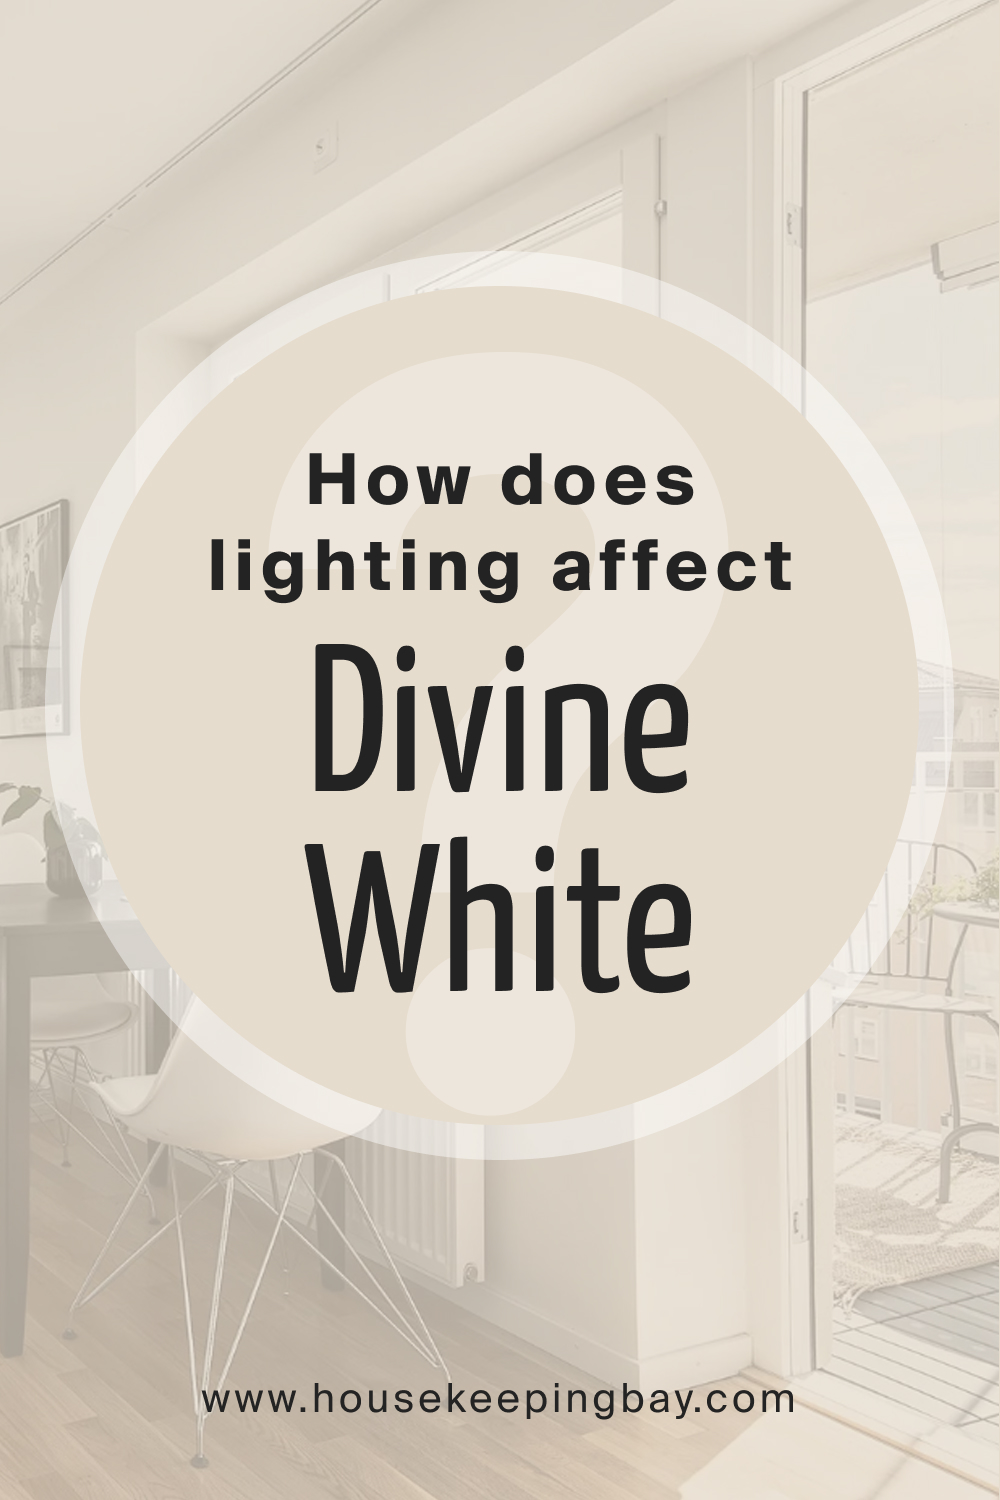 How does lighting affect SW Divine White